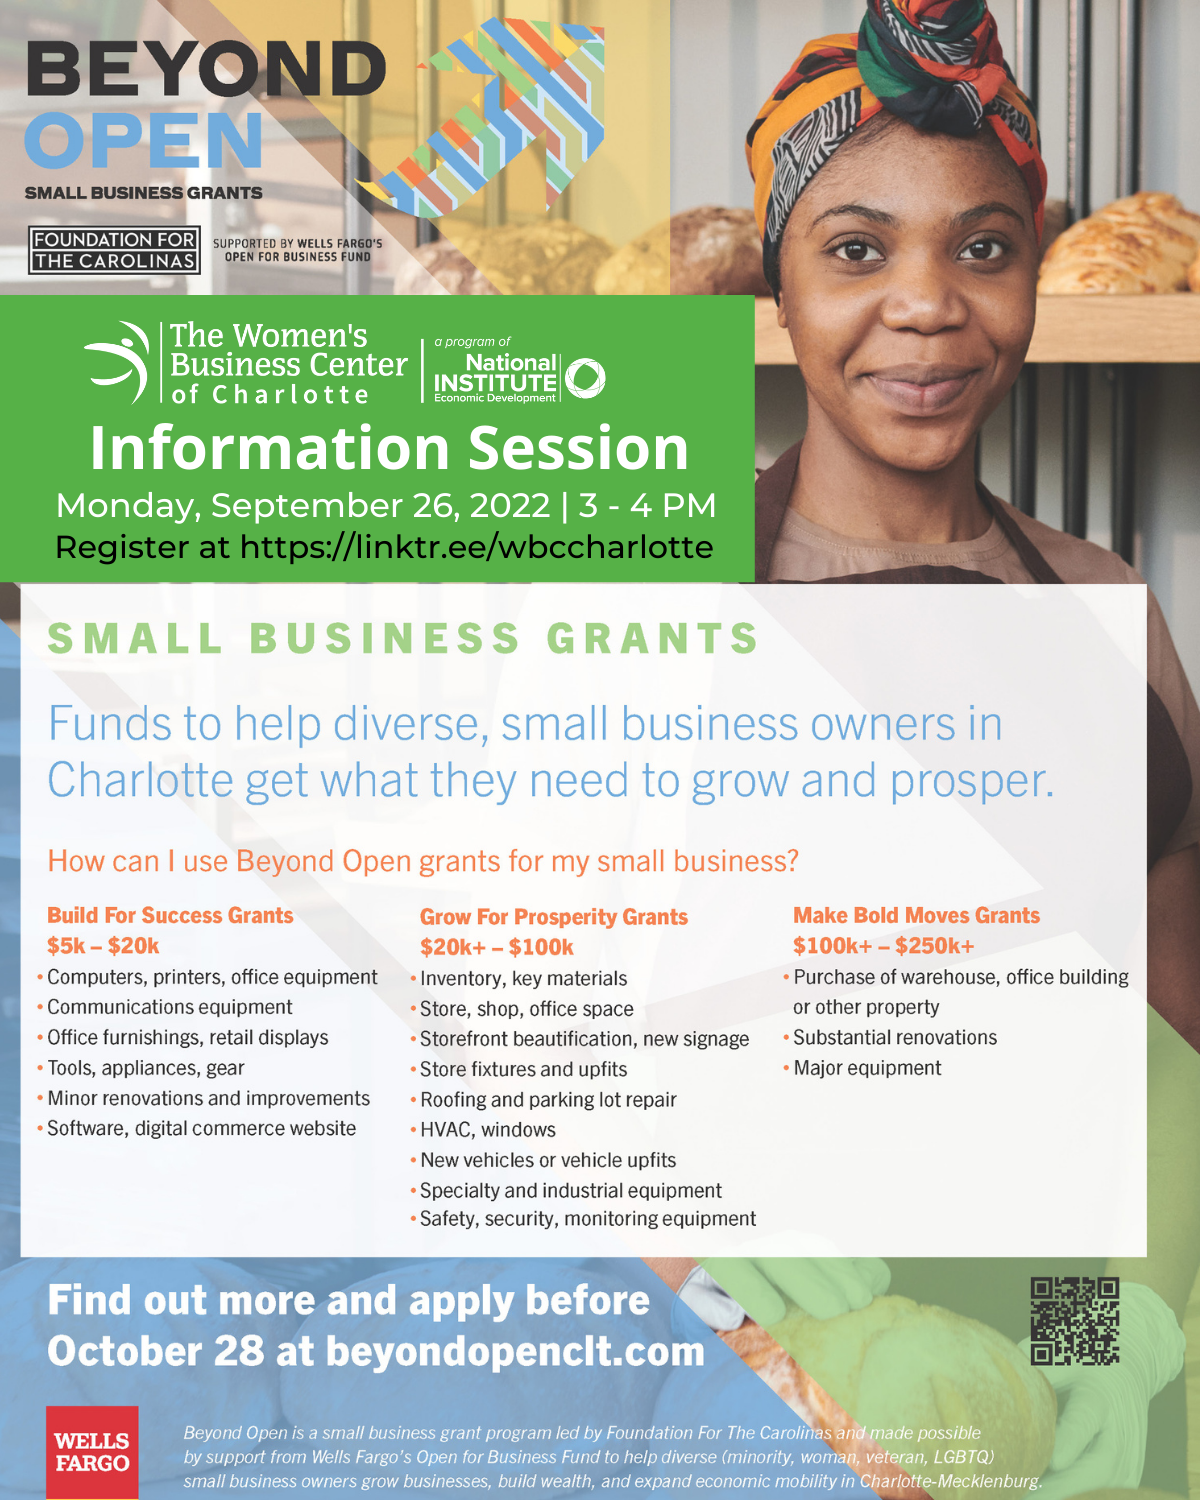 Beyond Open Small Business Grants Information Session